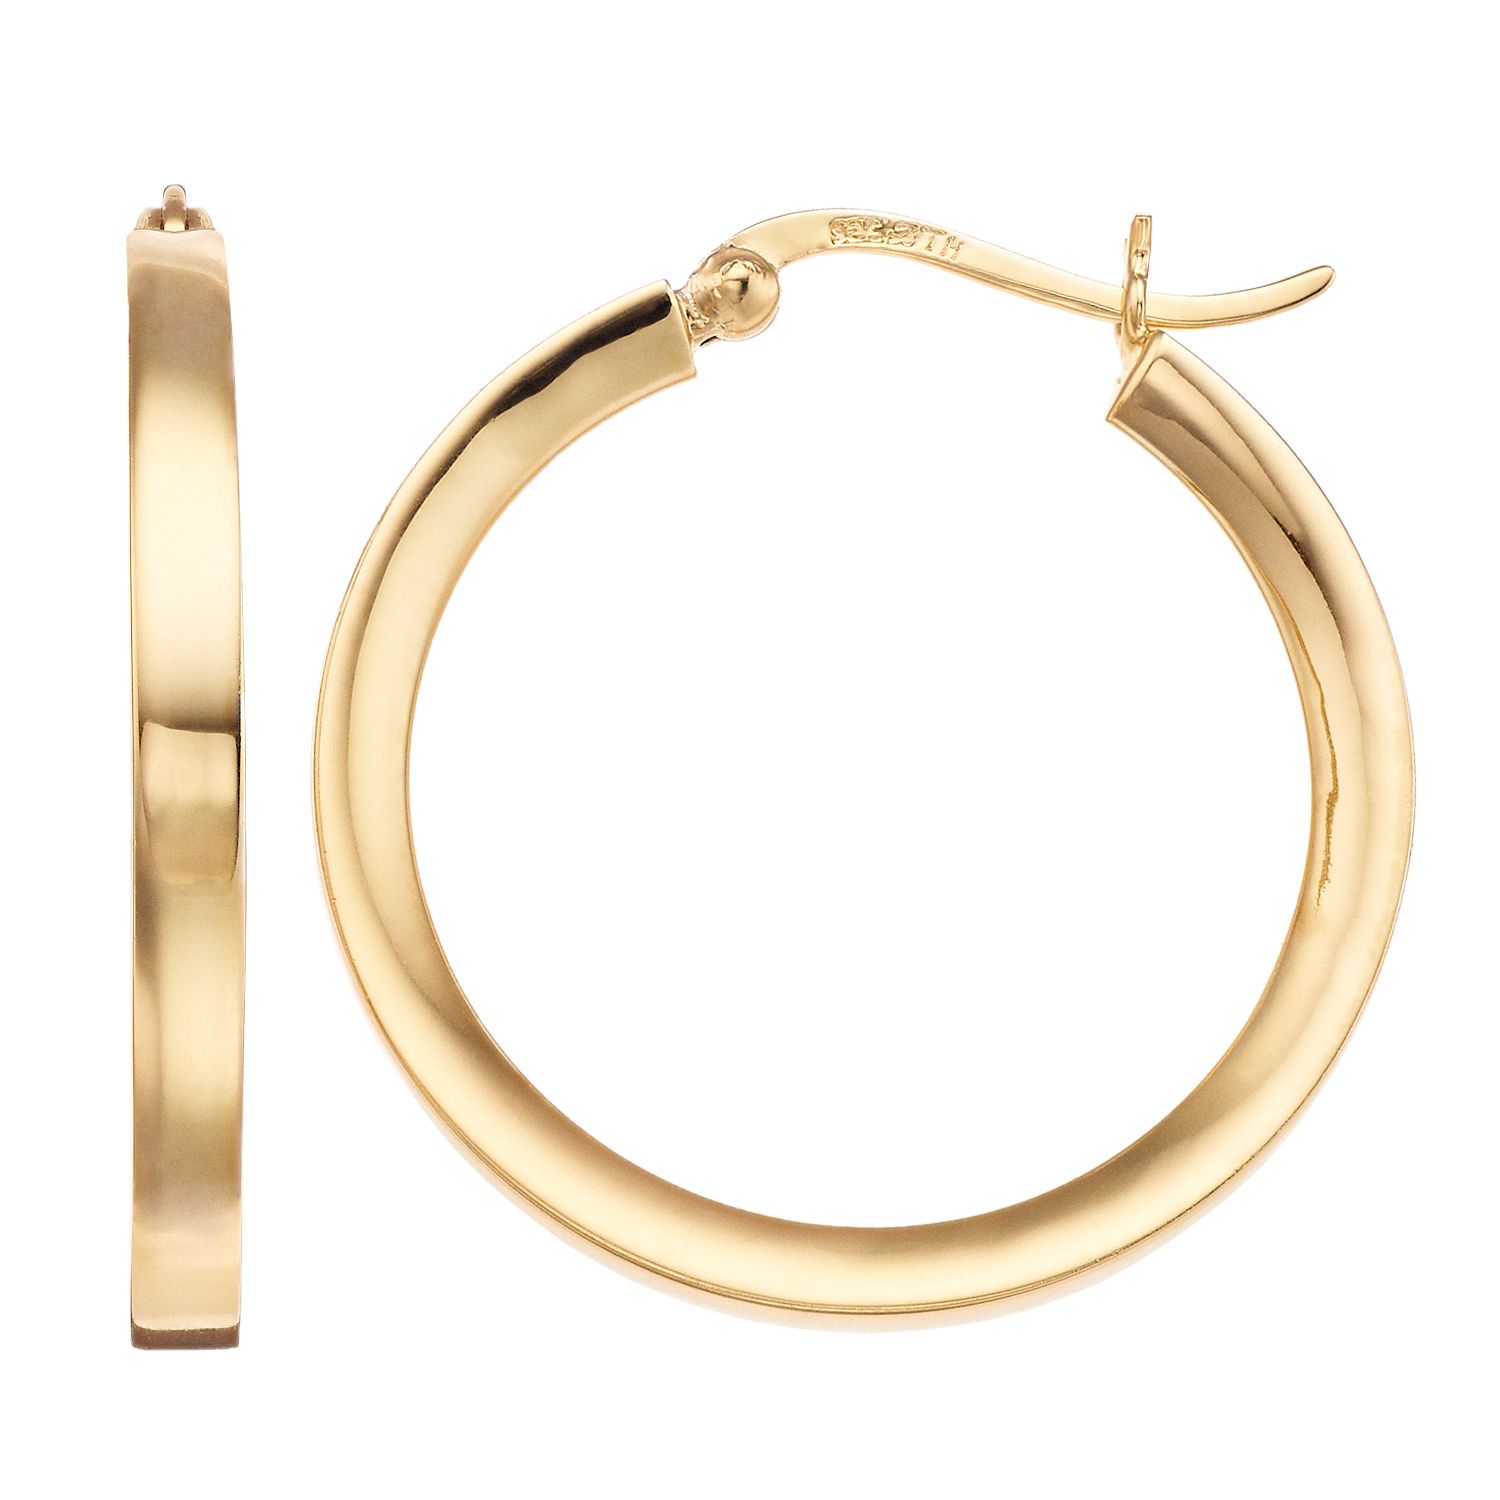 Gold And Silver Earrings Hoops Top Sellers, 54% OFF | www 